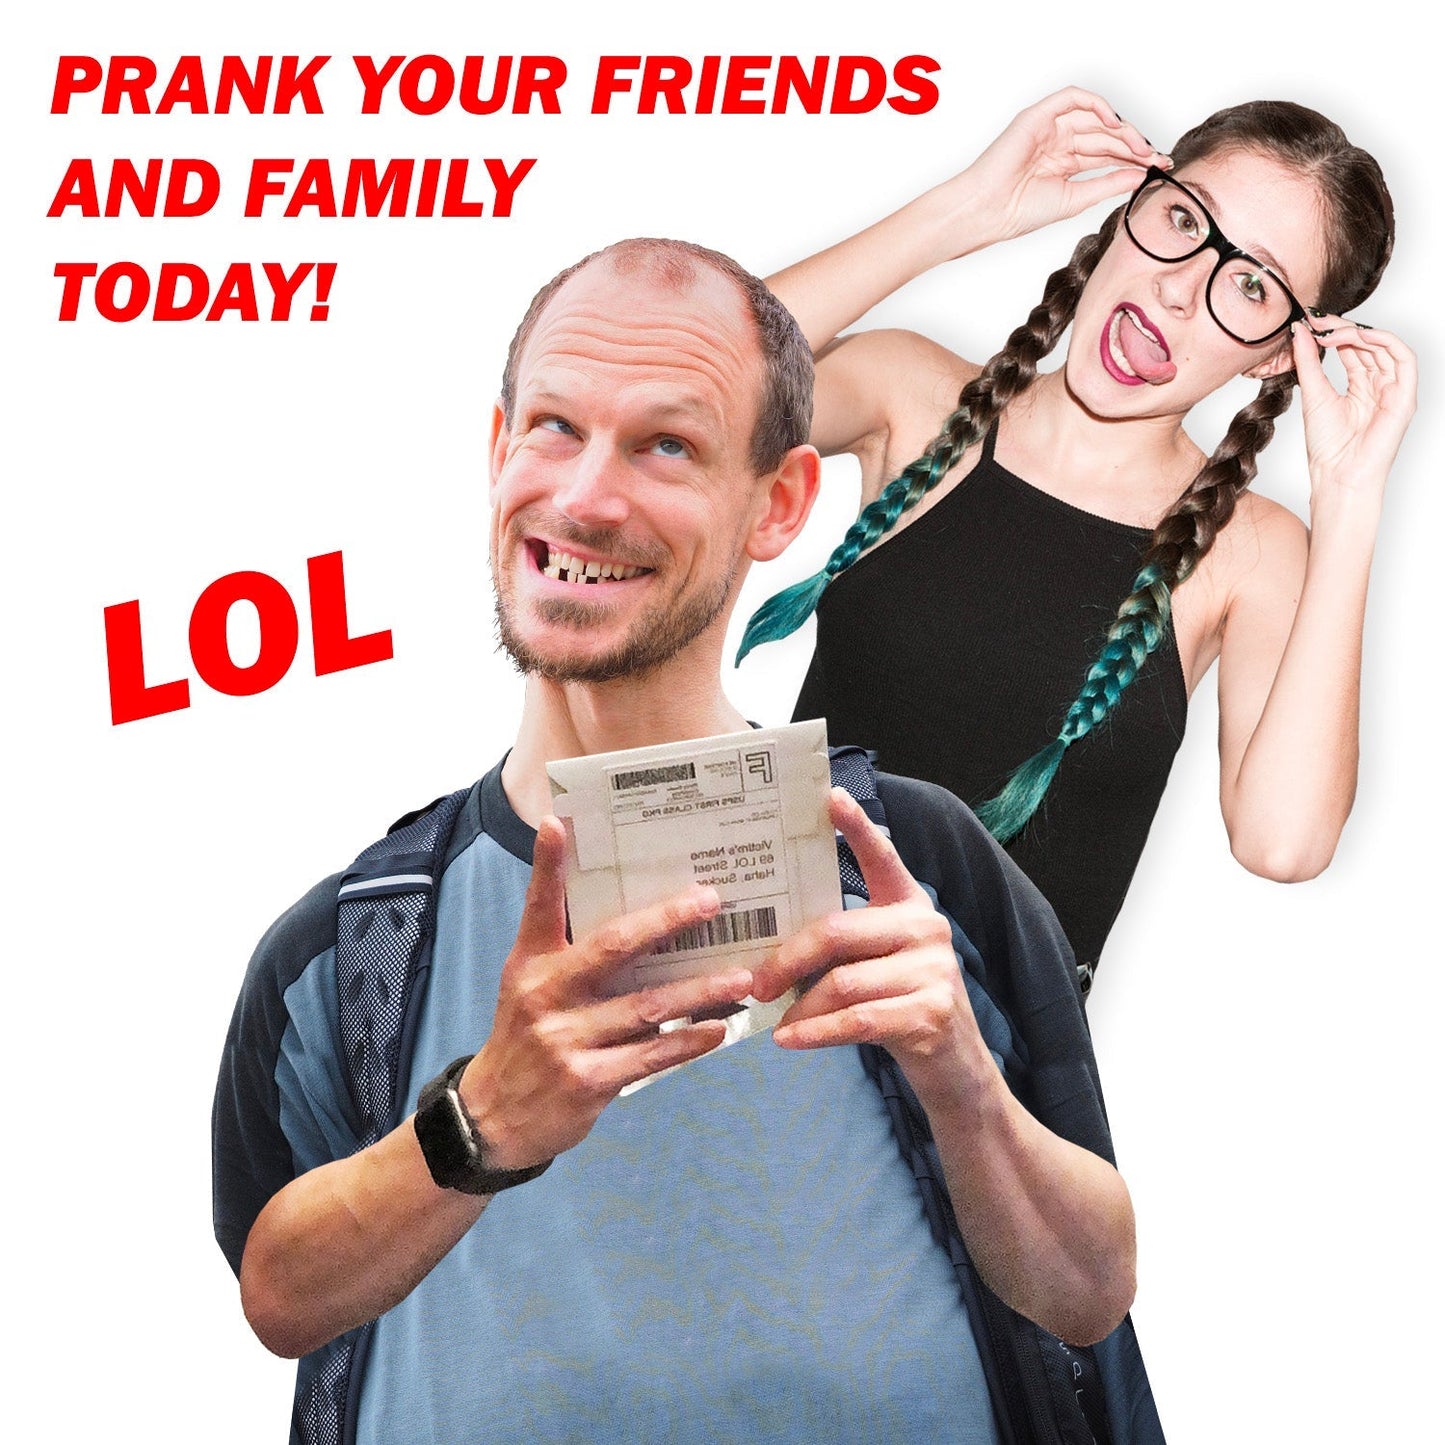 Farting With The Oldies Fake DVD mail prank gets sent directly to your victims 100% anonymously!